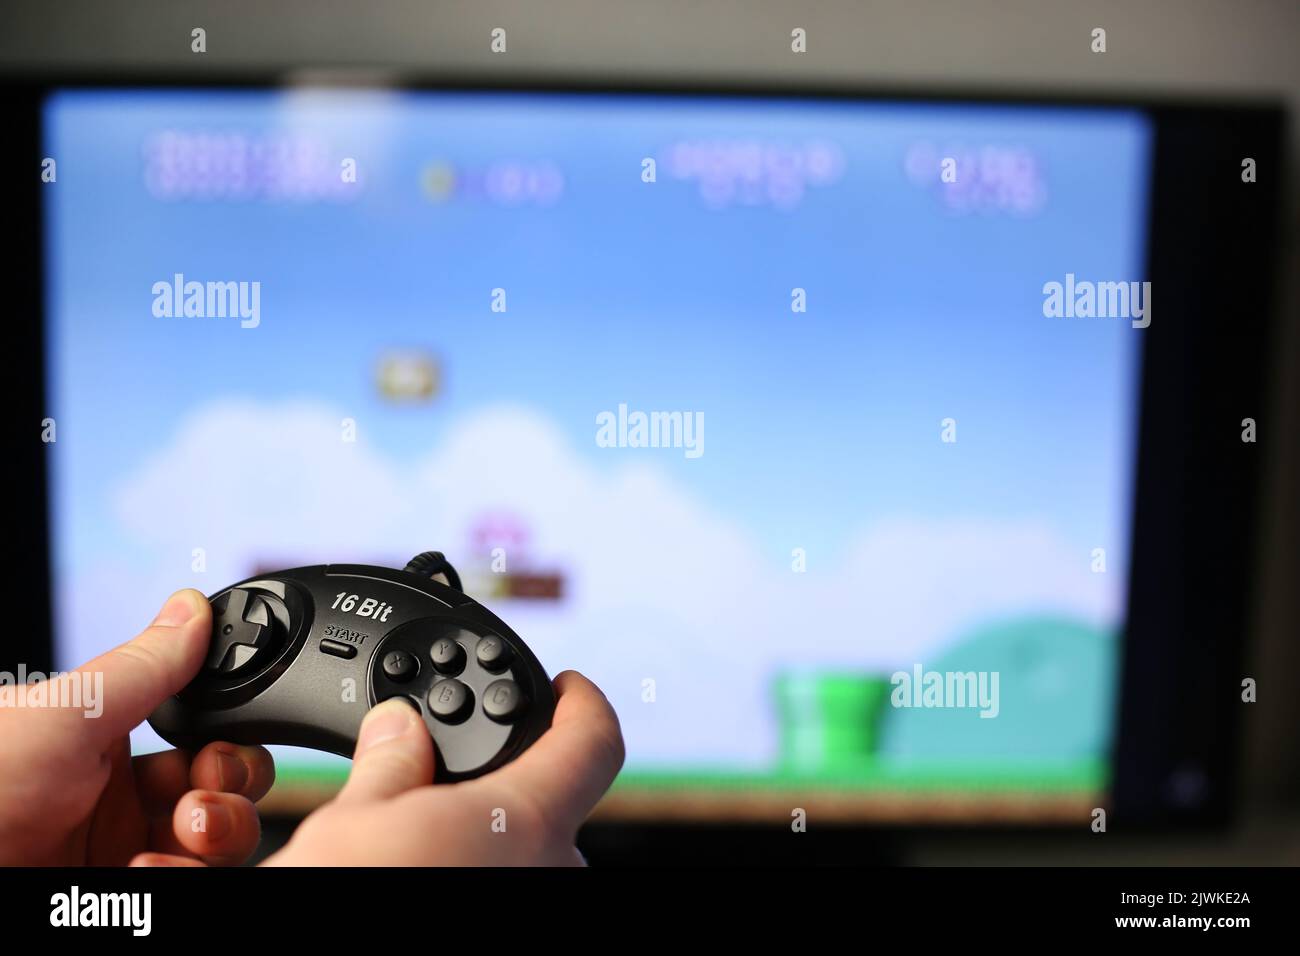 Plays a retro game on the TV while holding classic black joystick Stock Photo